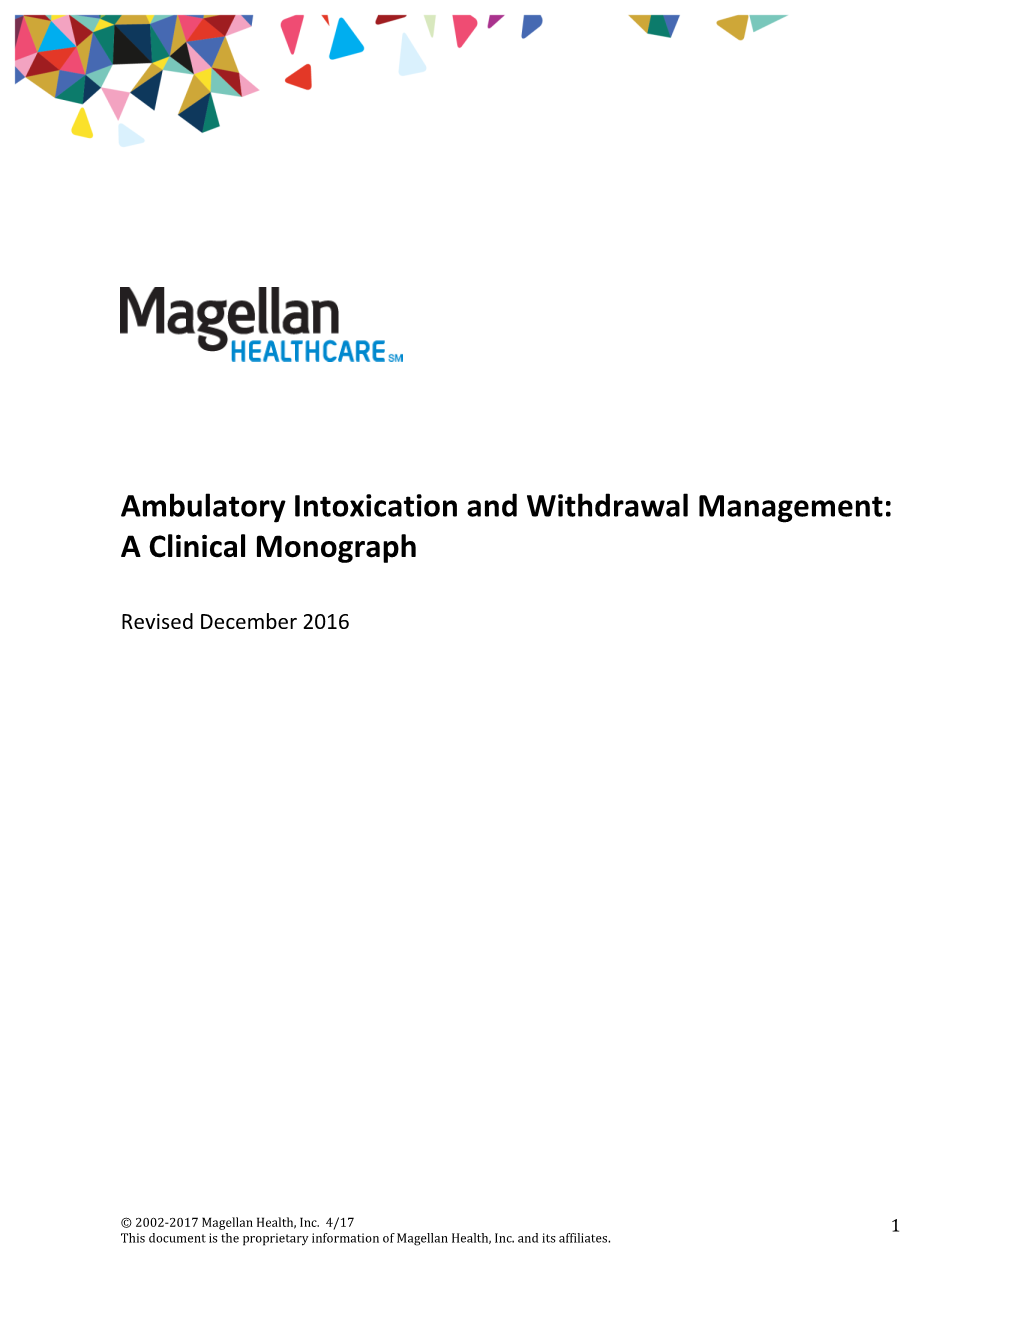 Ambulatory Intoxication and Withdrawal Management: a Clinical Monograph